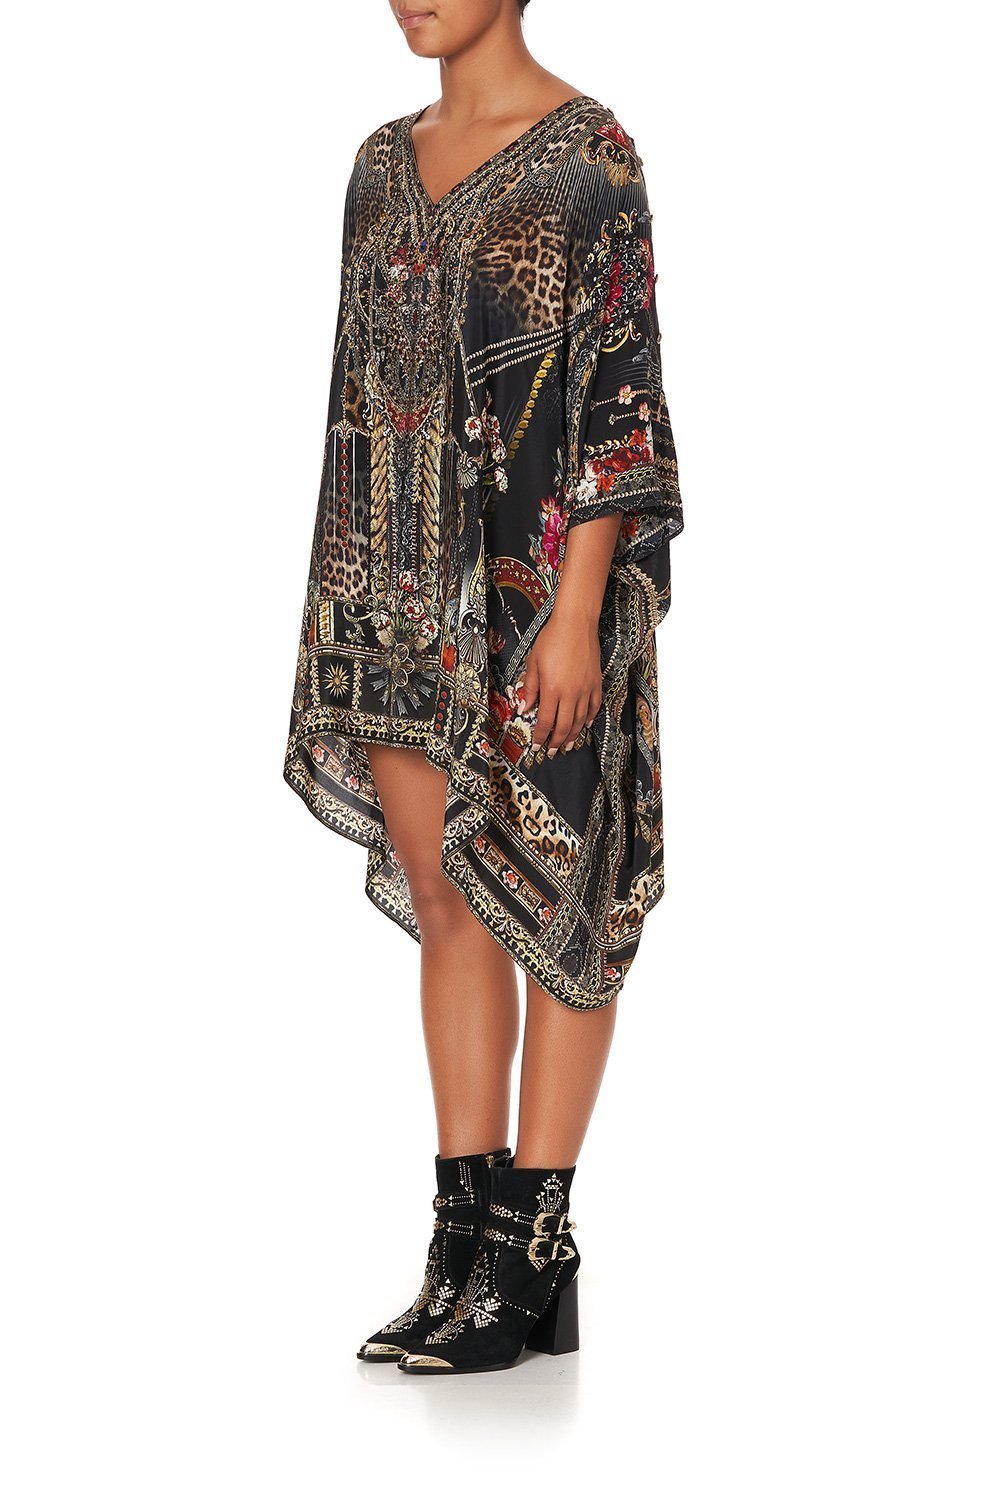 KAFTAN WITH BUTTON UP SLEEVES GOTHIC GODDESS